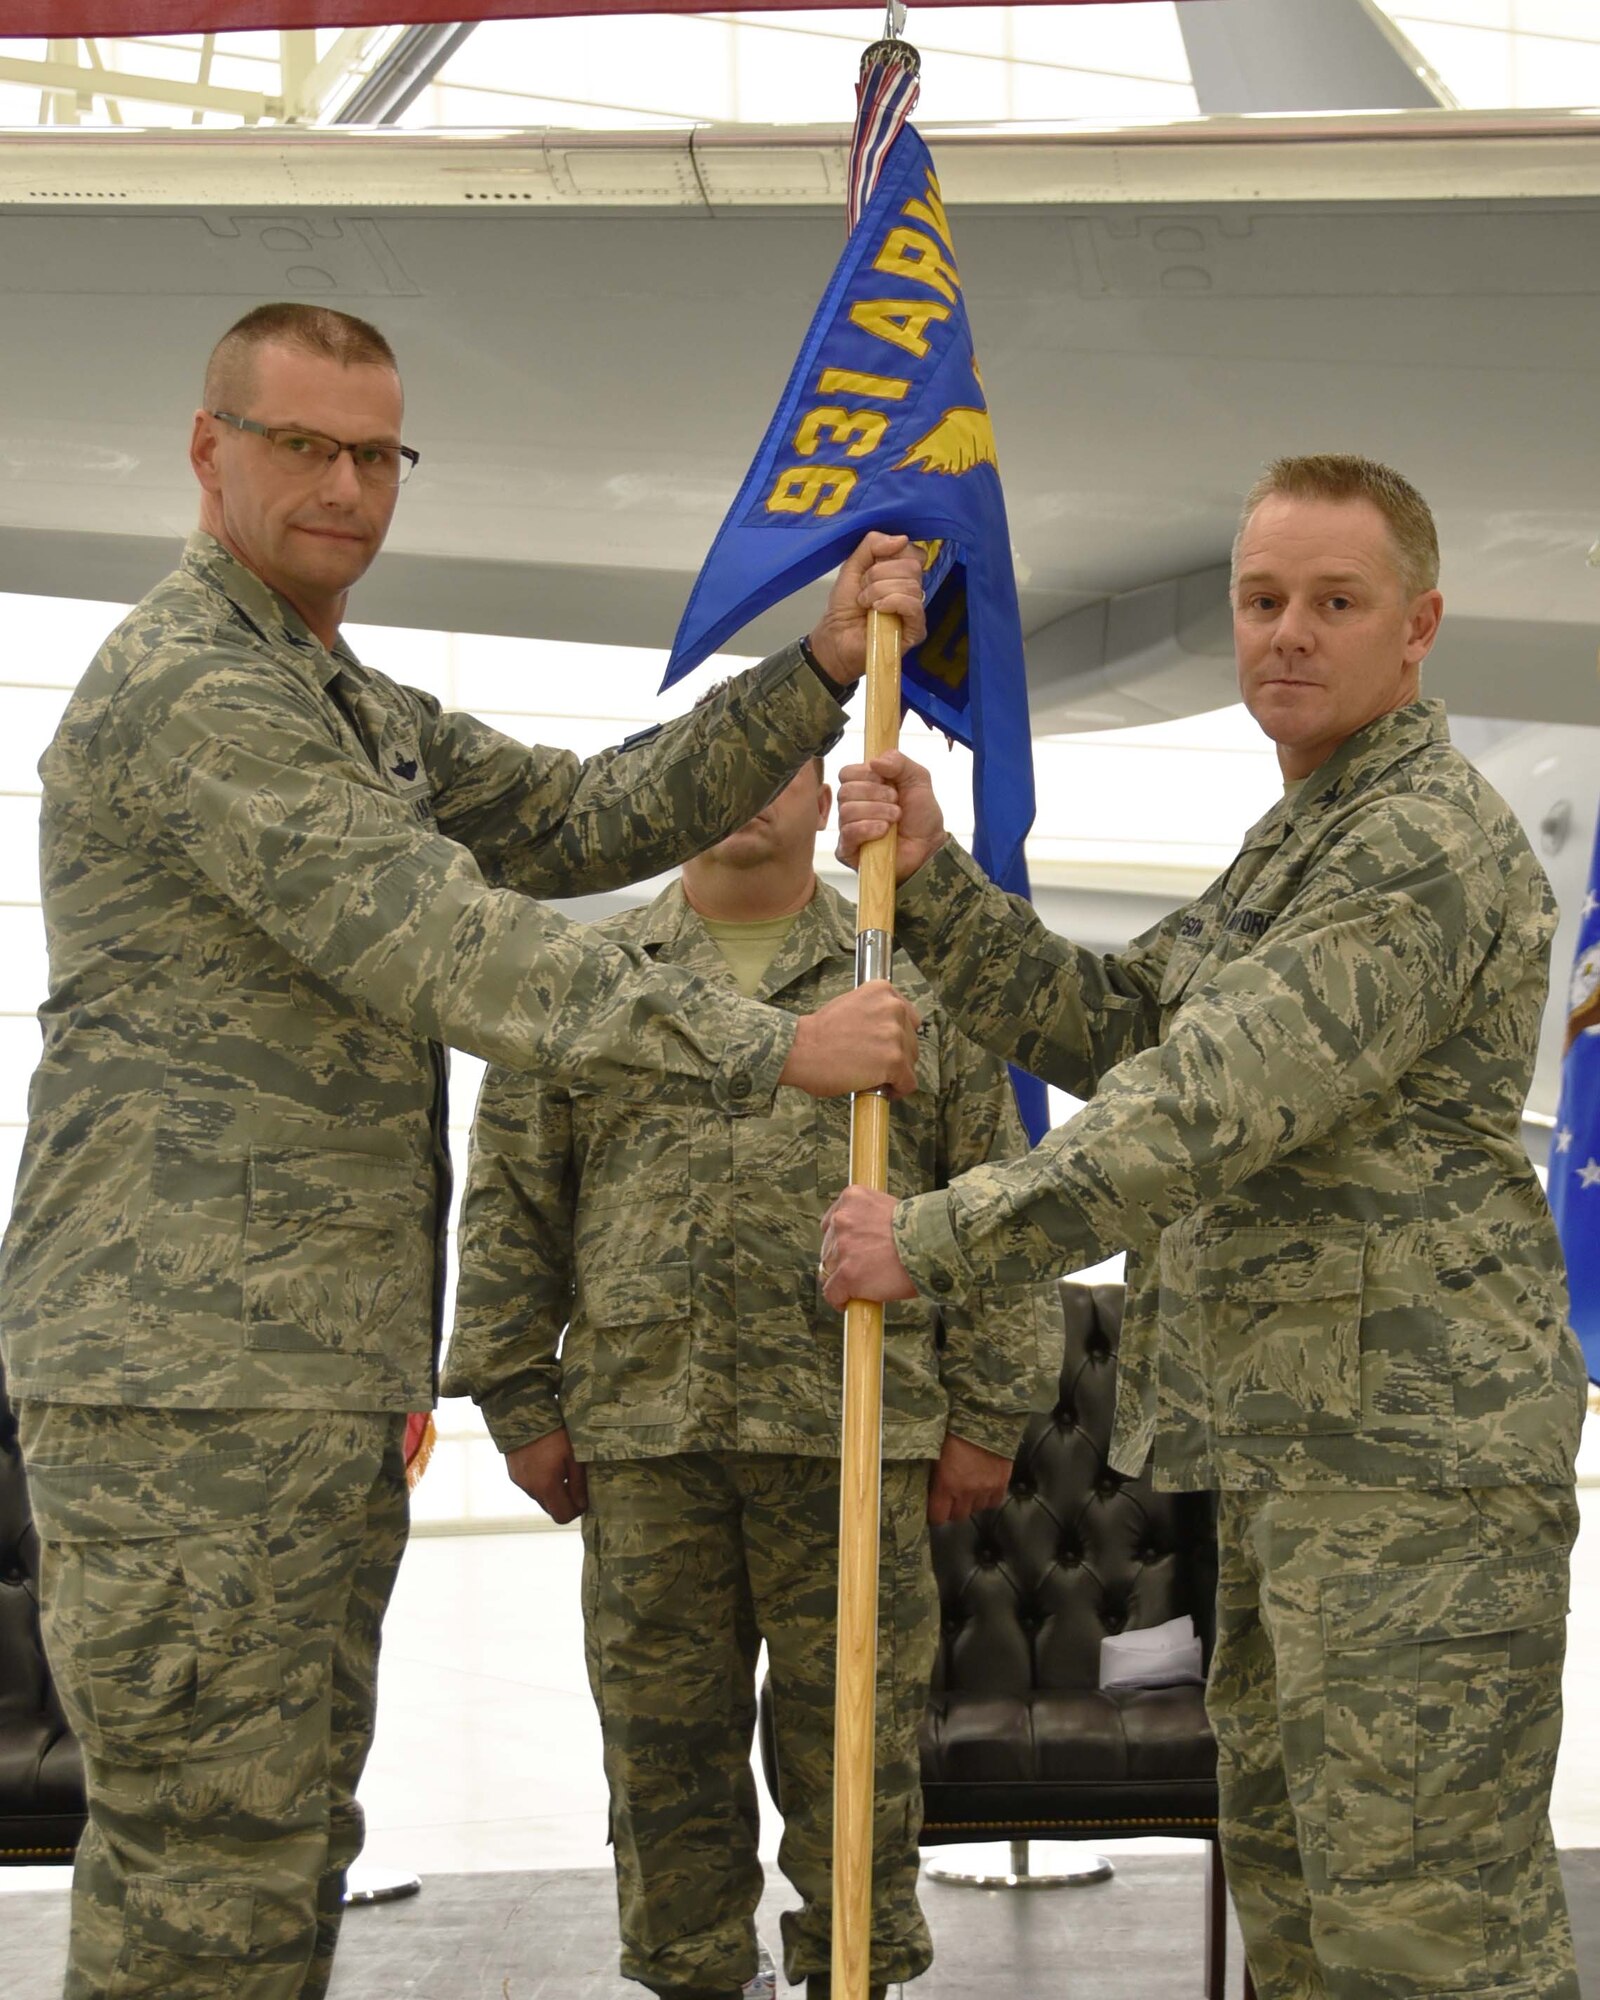 (Left to right) Col. Phil Heseltine, 931st Air Refueling Wing commander, hands the guidon to Col. Robert Thompson, the incoming 931st Maintenance Group commander, during an official change of command ceremony, Feb. 3, 2019, McConnell Air Force Base, Kan. As commander of the 931 MXG, Thompson is directly responsible for the training and readiness of more than 270 Reserve Citizen Airmen.